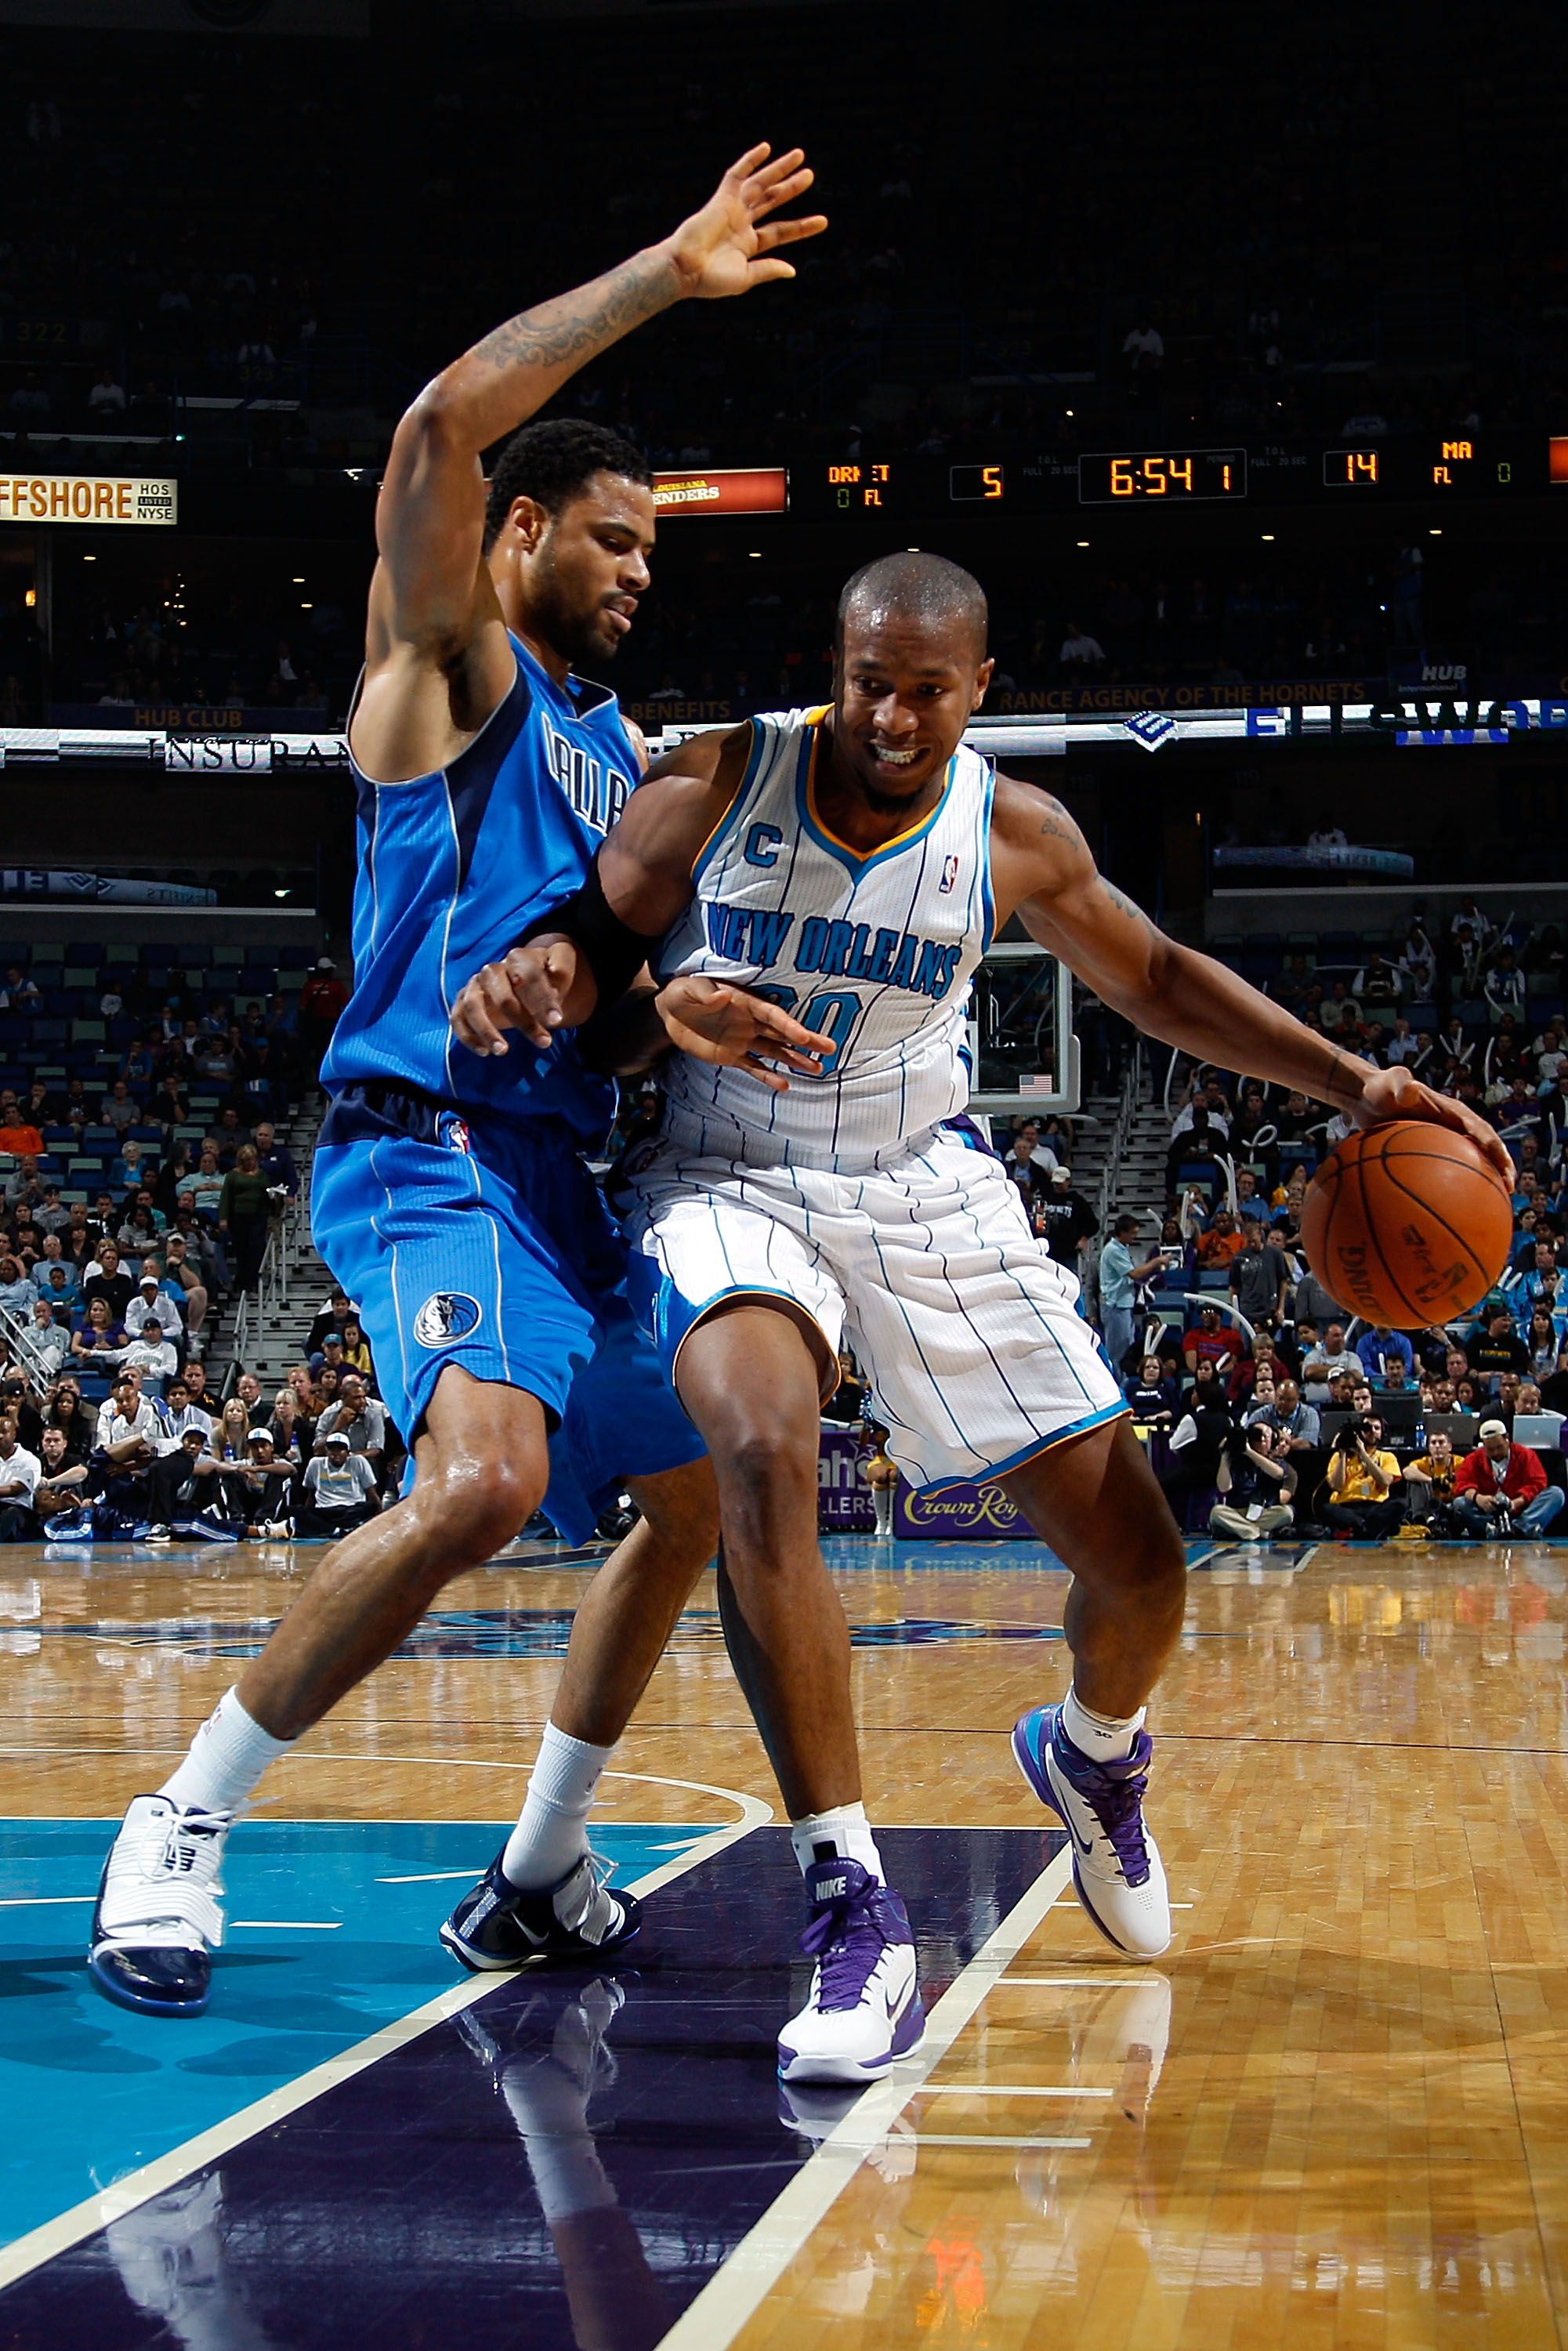 NEW ORLEANS - NOVEMBER 17:  David West #30 of the New Orleans Hornets drives the ball around Tyson Chandler #6 of the Dallas Mavericks at the New Orleans Arena on November 17, 2010 in New Orleans, Louisiana.  The Hornets defeated the Mavericks 99-97.  NOT